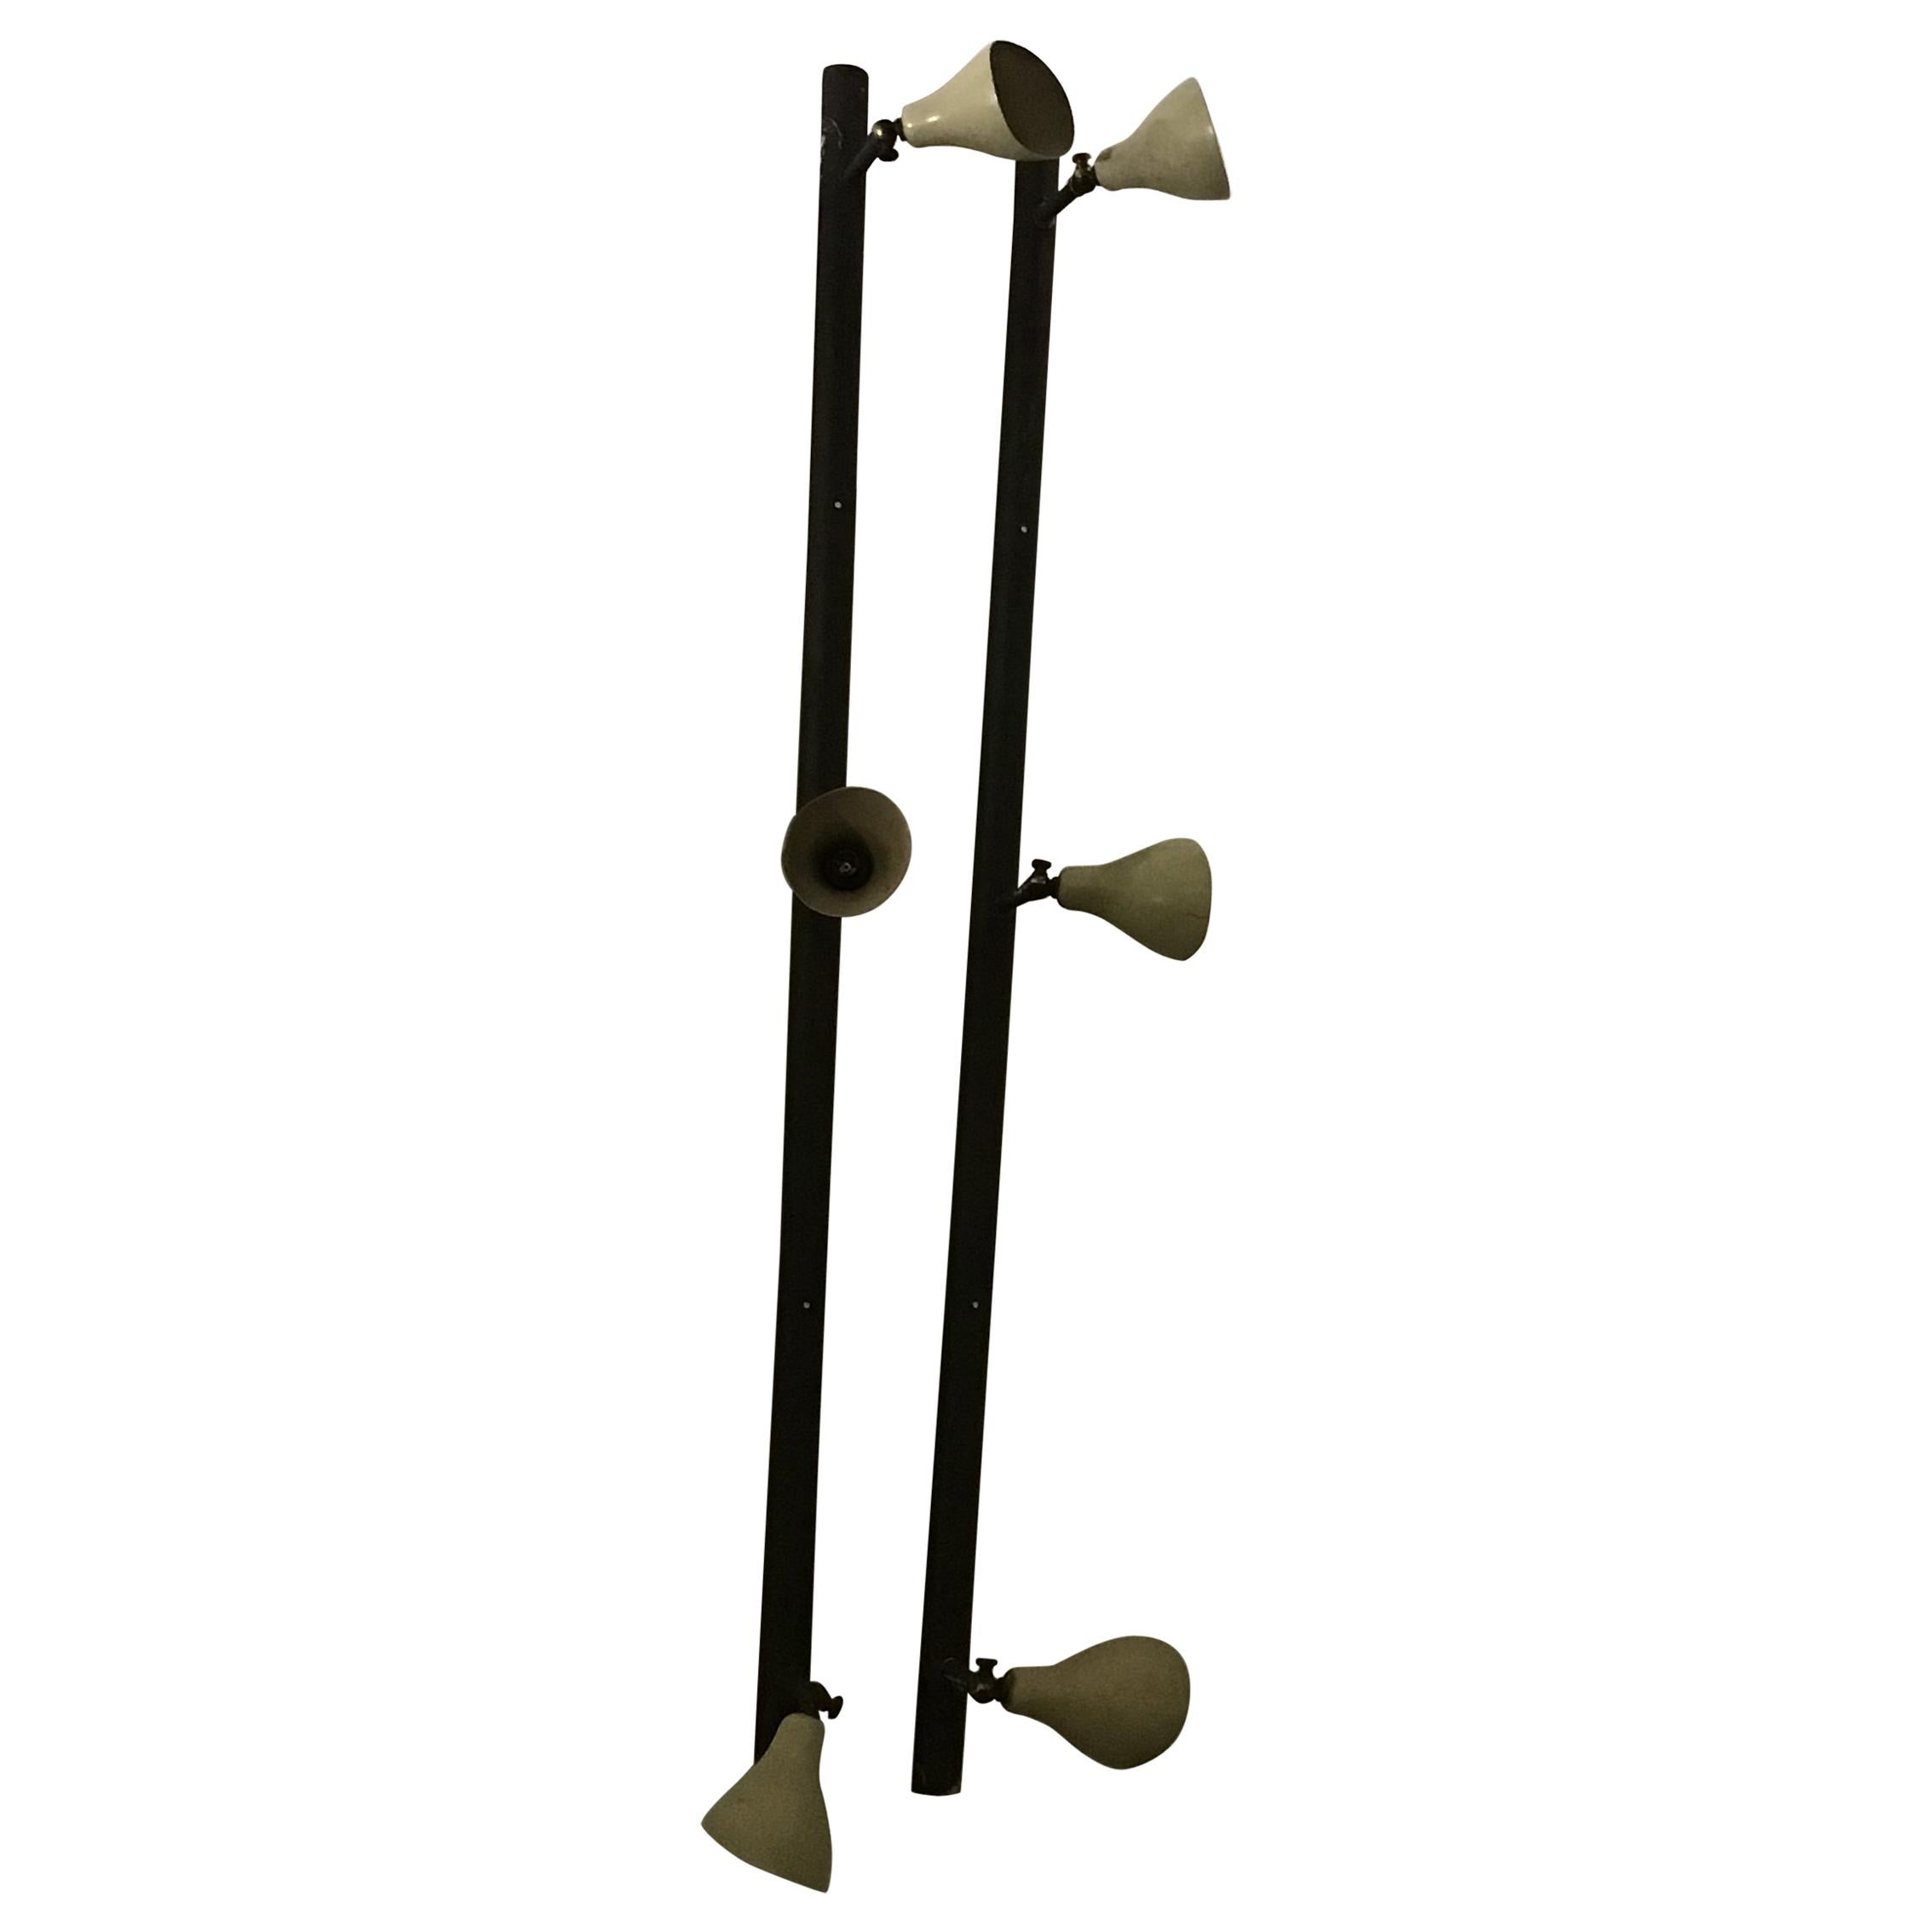 Arteluce Gino Sarfatti Brass and Painted Metal Wall Light Cream Color, 1950 For Sale